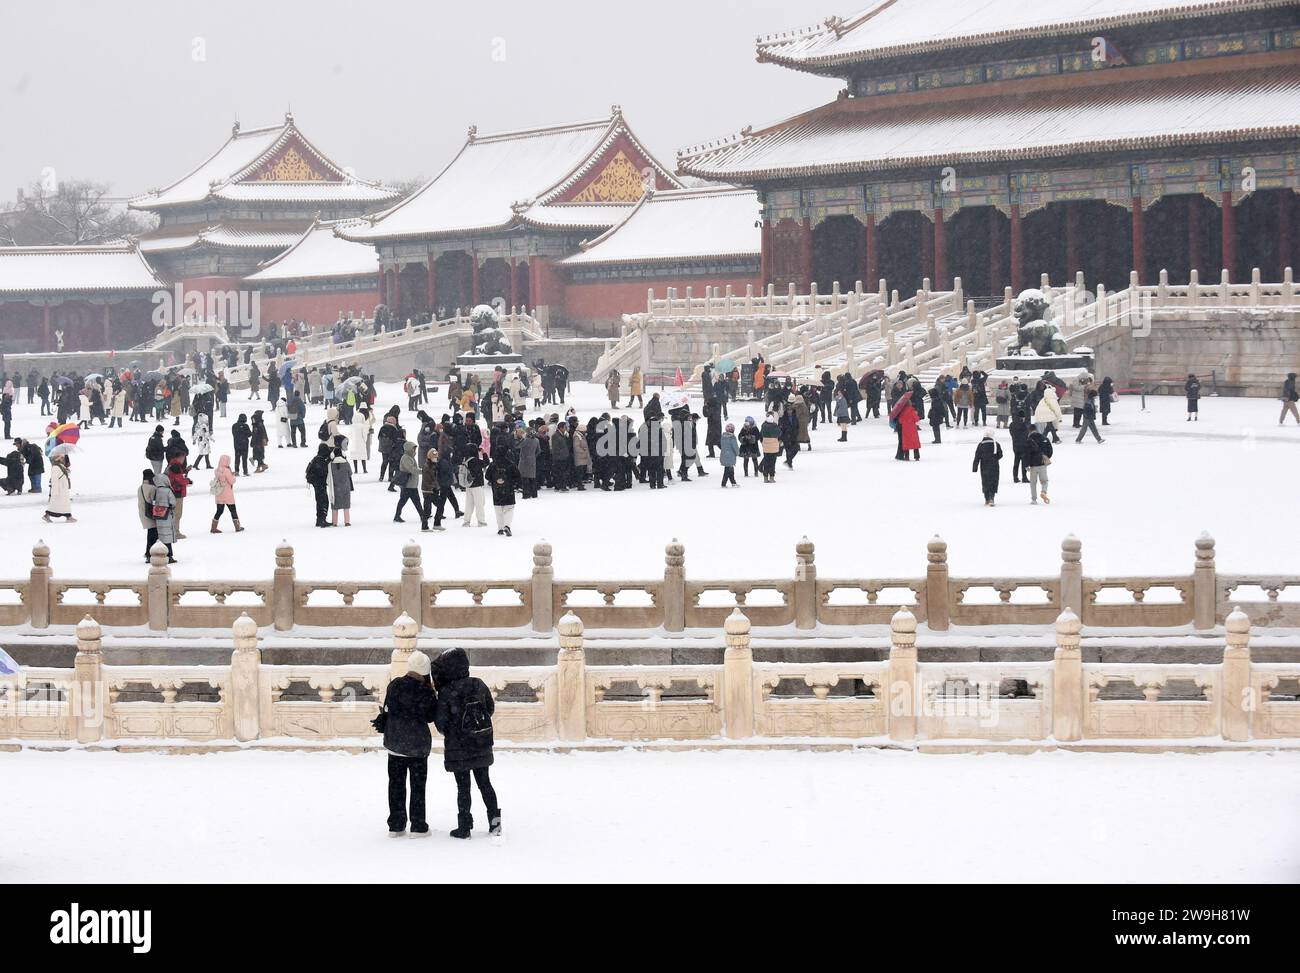 (231228) -- BEIJING, Dec. 28, 2023 (Xinhua) -- Visitors enjoy snow scenery at the Palace Museum in Beijing, capital of China, Dec. 14, 2023. First created in the Yuan Dynasty (1271-1368), the Beijing Central Axis, or Zhongzhouxian, stretches 7.8 kilometers between the Yongding Gate in the south of the city and the Drum Tower and Bell Tower in the north. Most of the major old-city buildings of Beijing sit along this axis. Gates, palaces, temples, squares and gardens of the old city are all linked up to the axis. As they witnessed the folk activities along the line from old days to new ones, Stock Photo